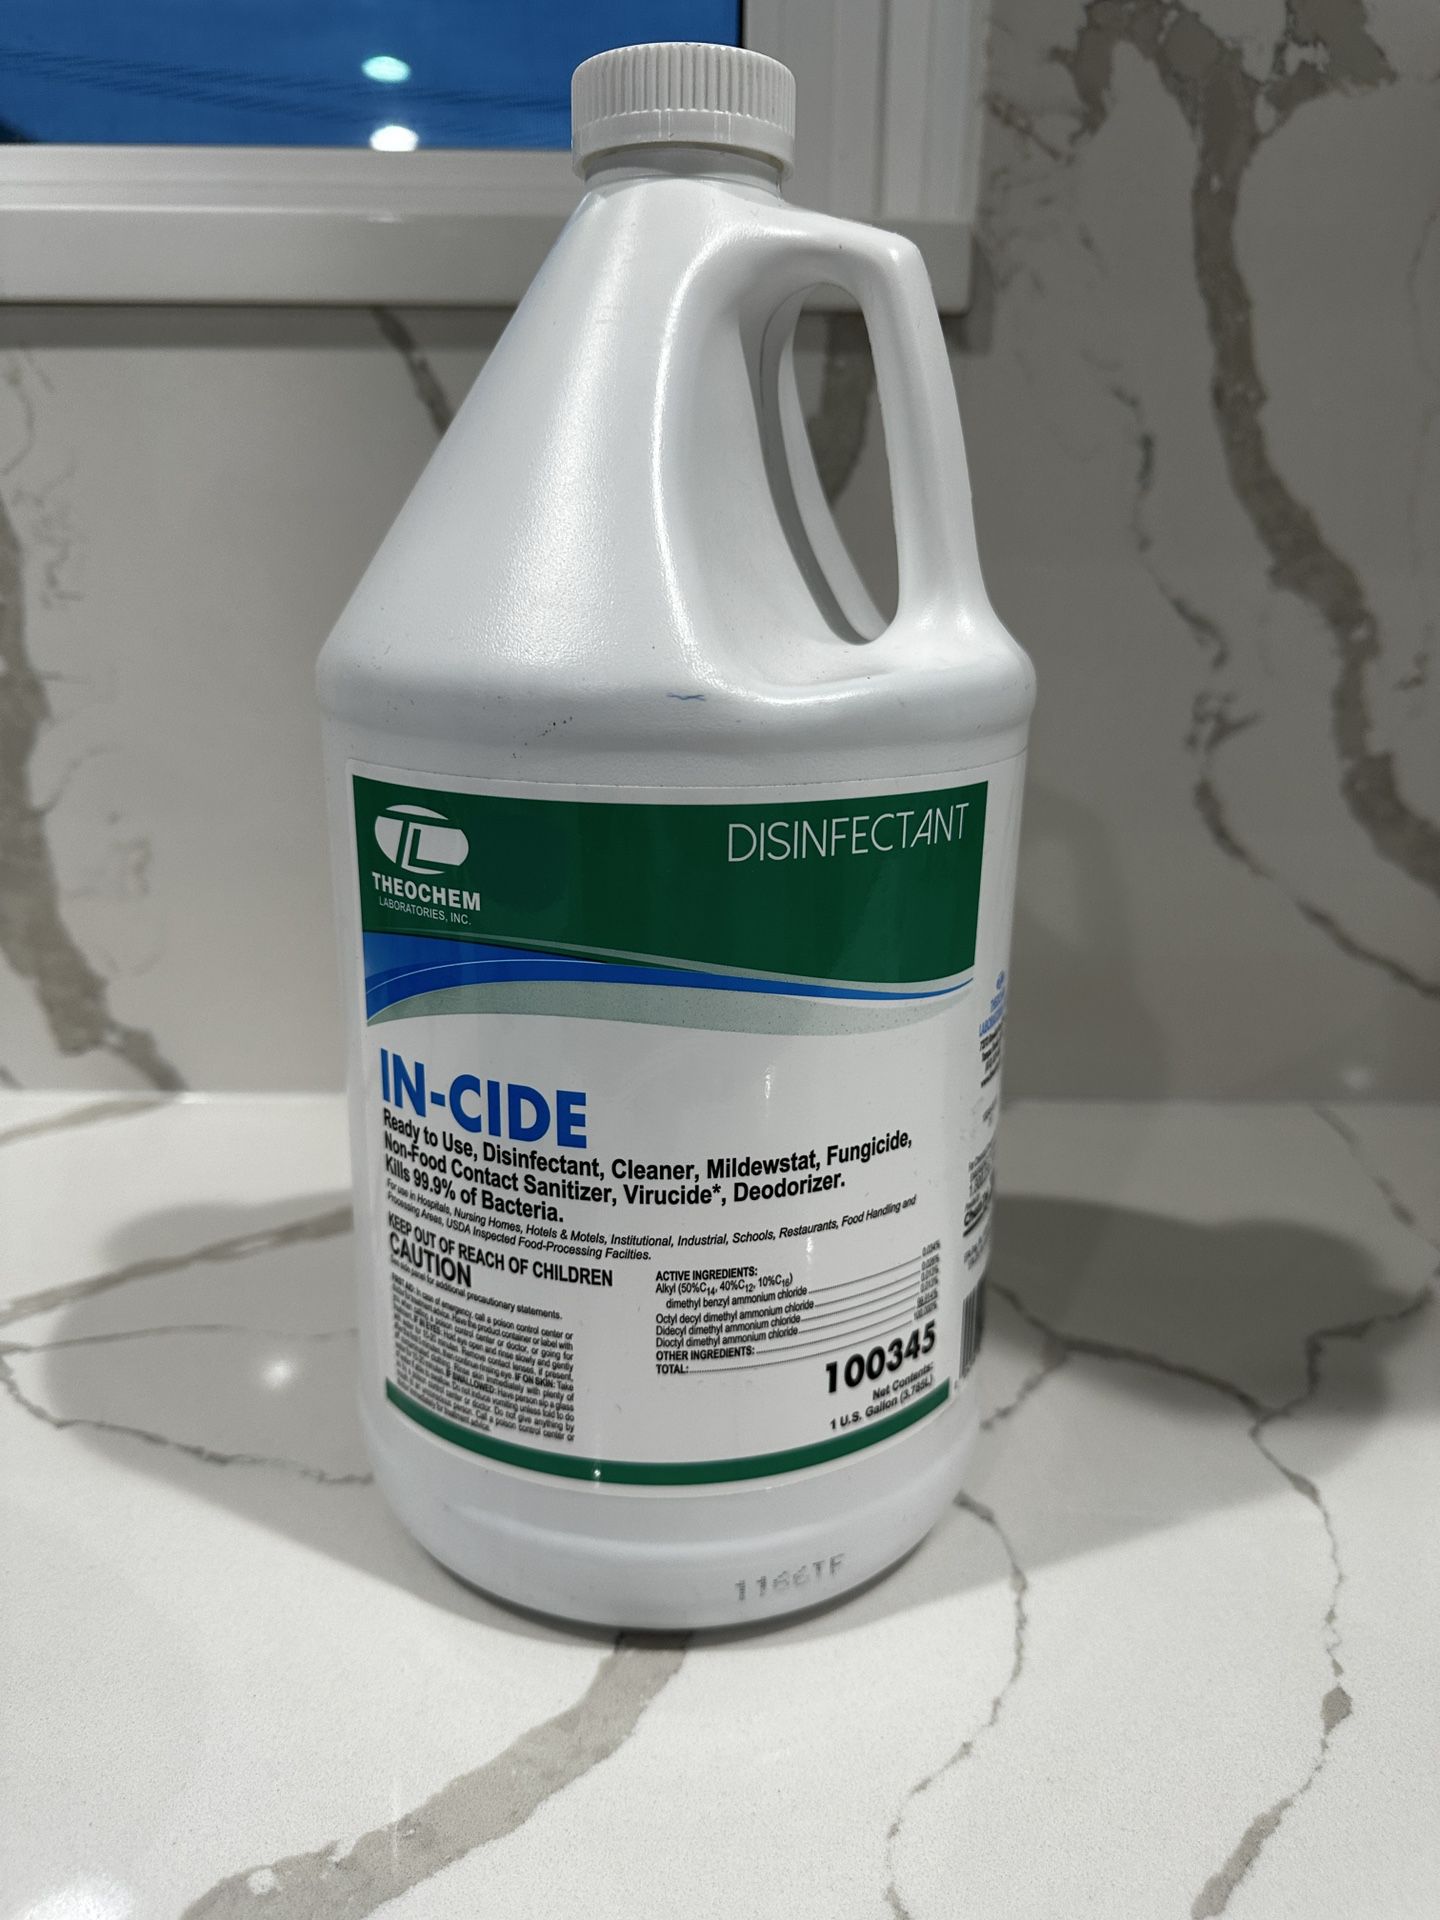 Brand new, sealed In-cide disinfectant 1 gallon. 